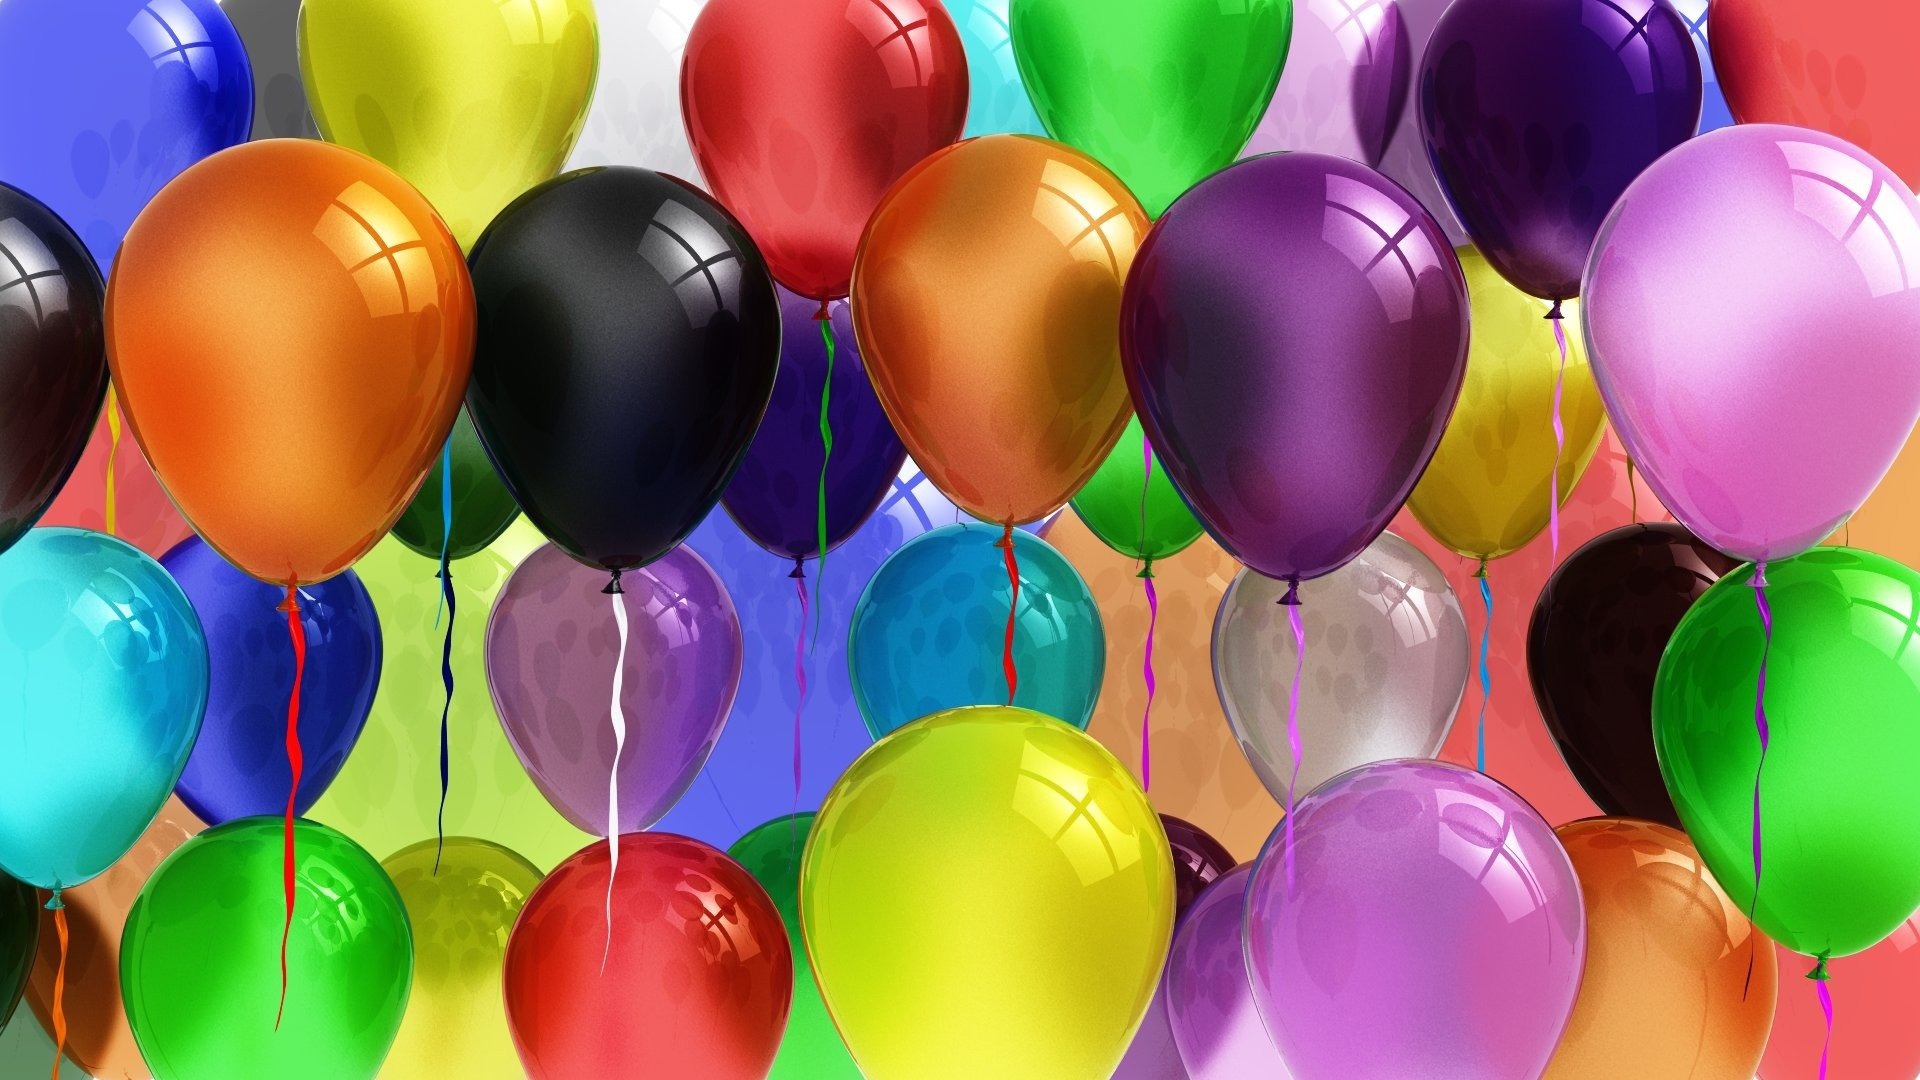 Garland of balloons wallpapers and images - wallpapers, pictures ...